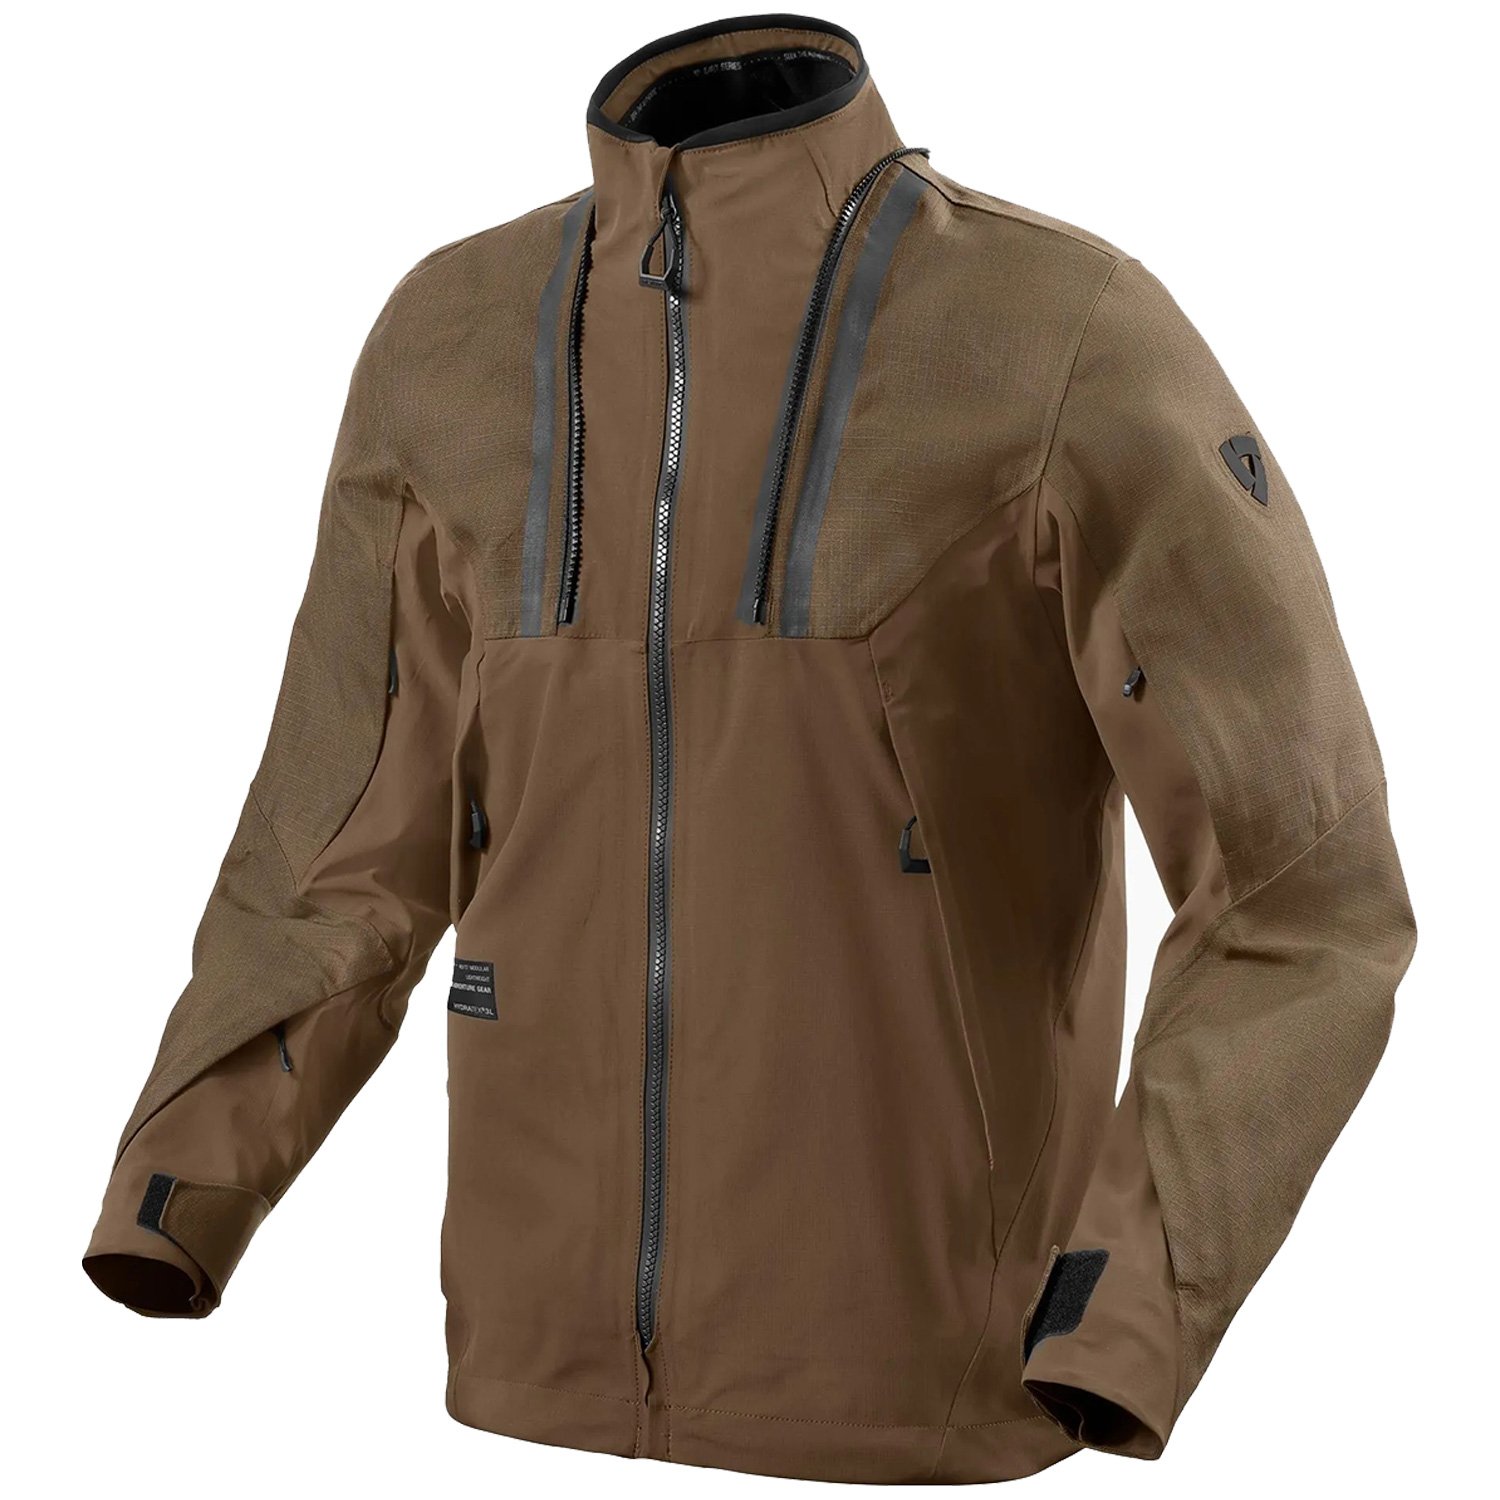 Image of REV'IT! Component 2 H2O Jacket Brown Talla S